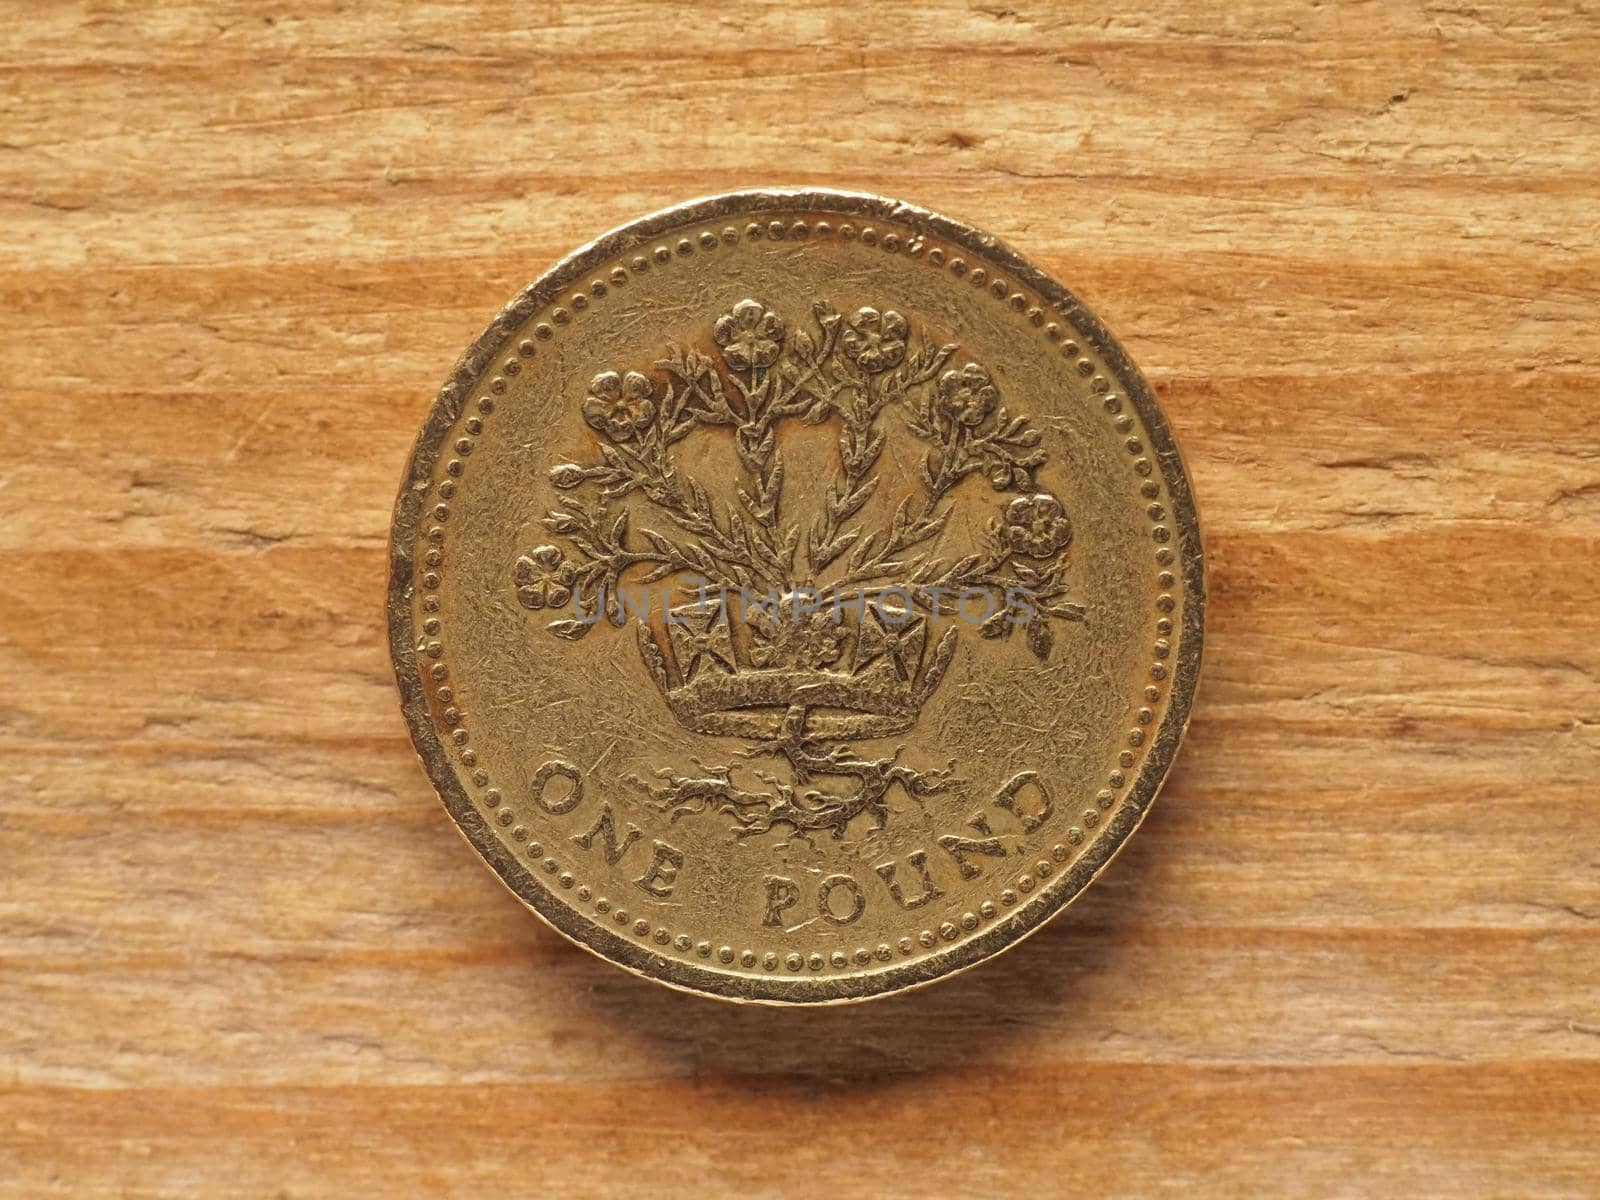 1 Pound coin, reverse side showing flax plant and diadem representing Northern Ireland, currency of the UK by claudiodivizia